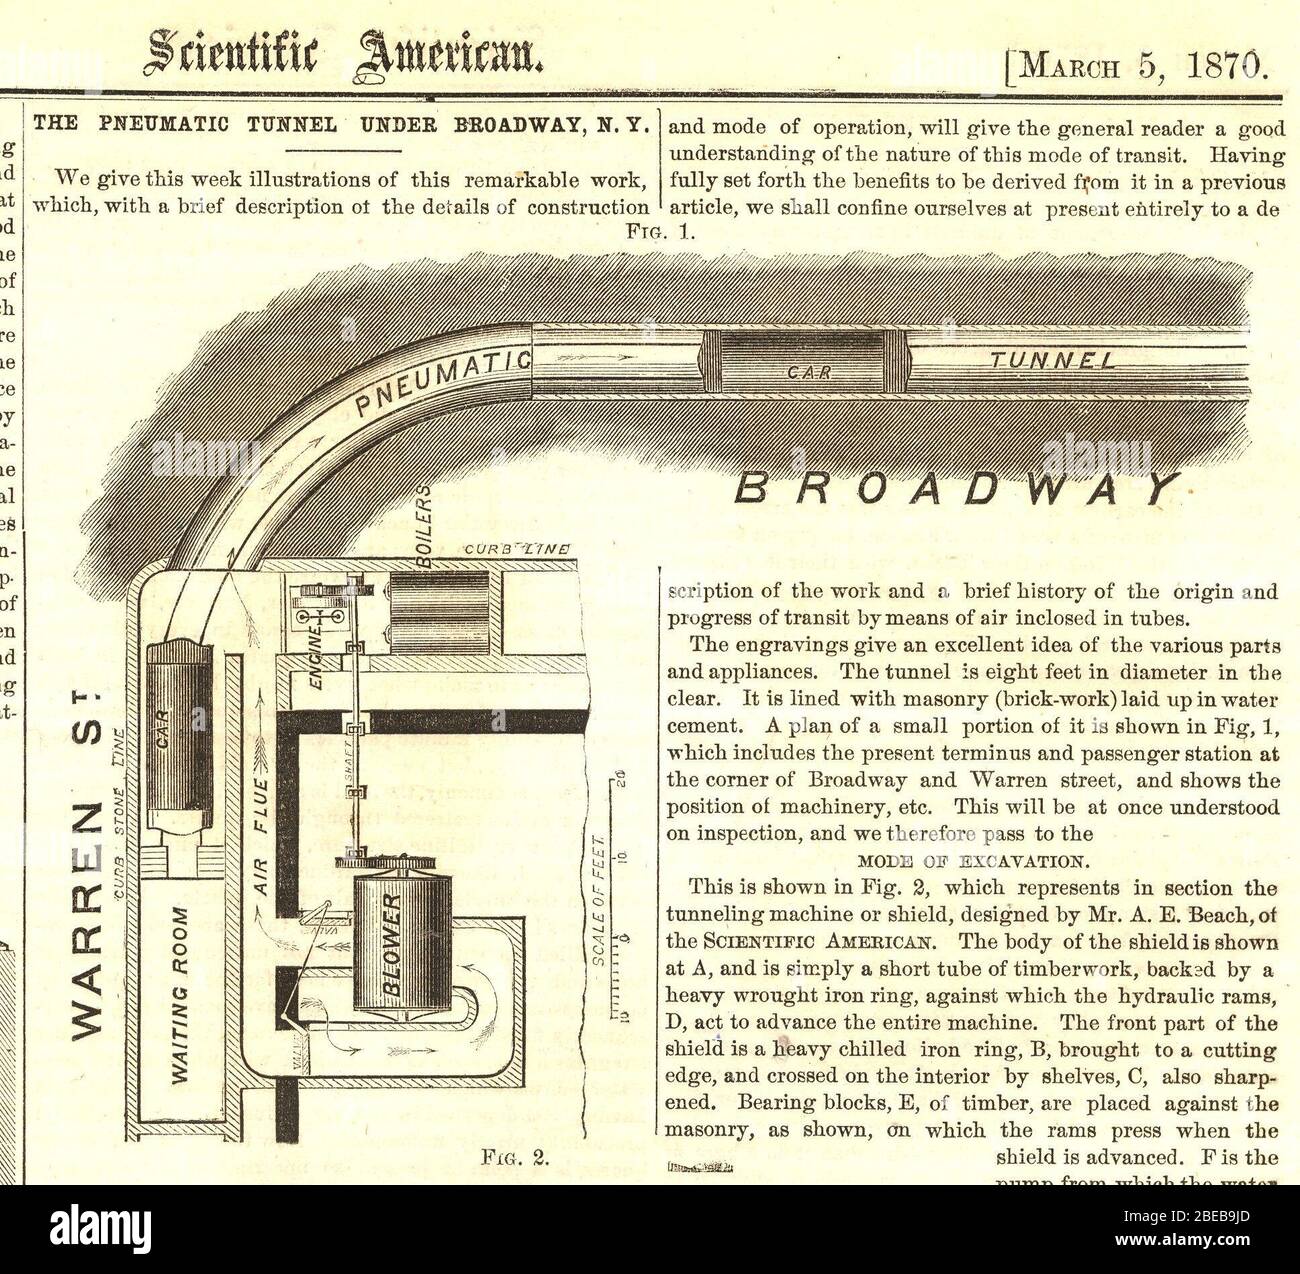 'English: Scan by Joseph Brennan from an original copy of Scientific American for March 5, 1870.; Scientific American - March 5, 1870 issue; Scientific American; ' Stock Photo